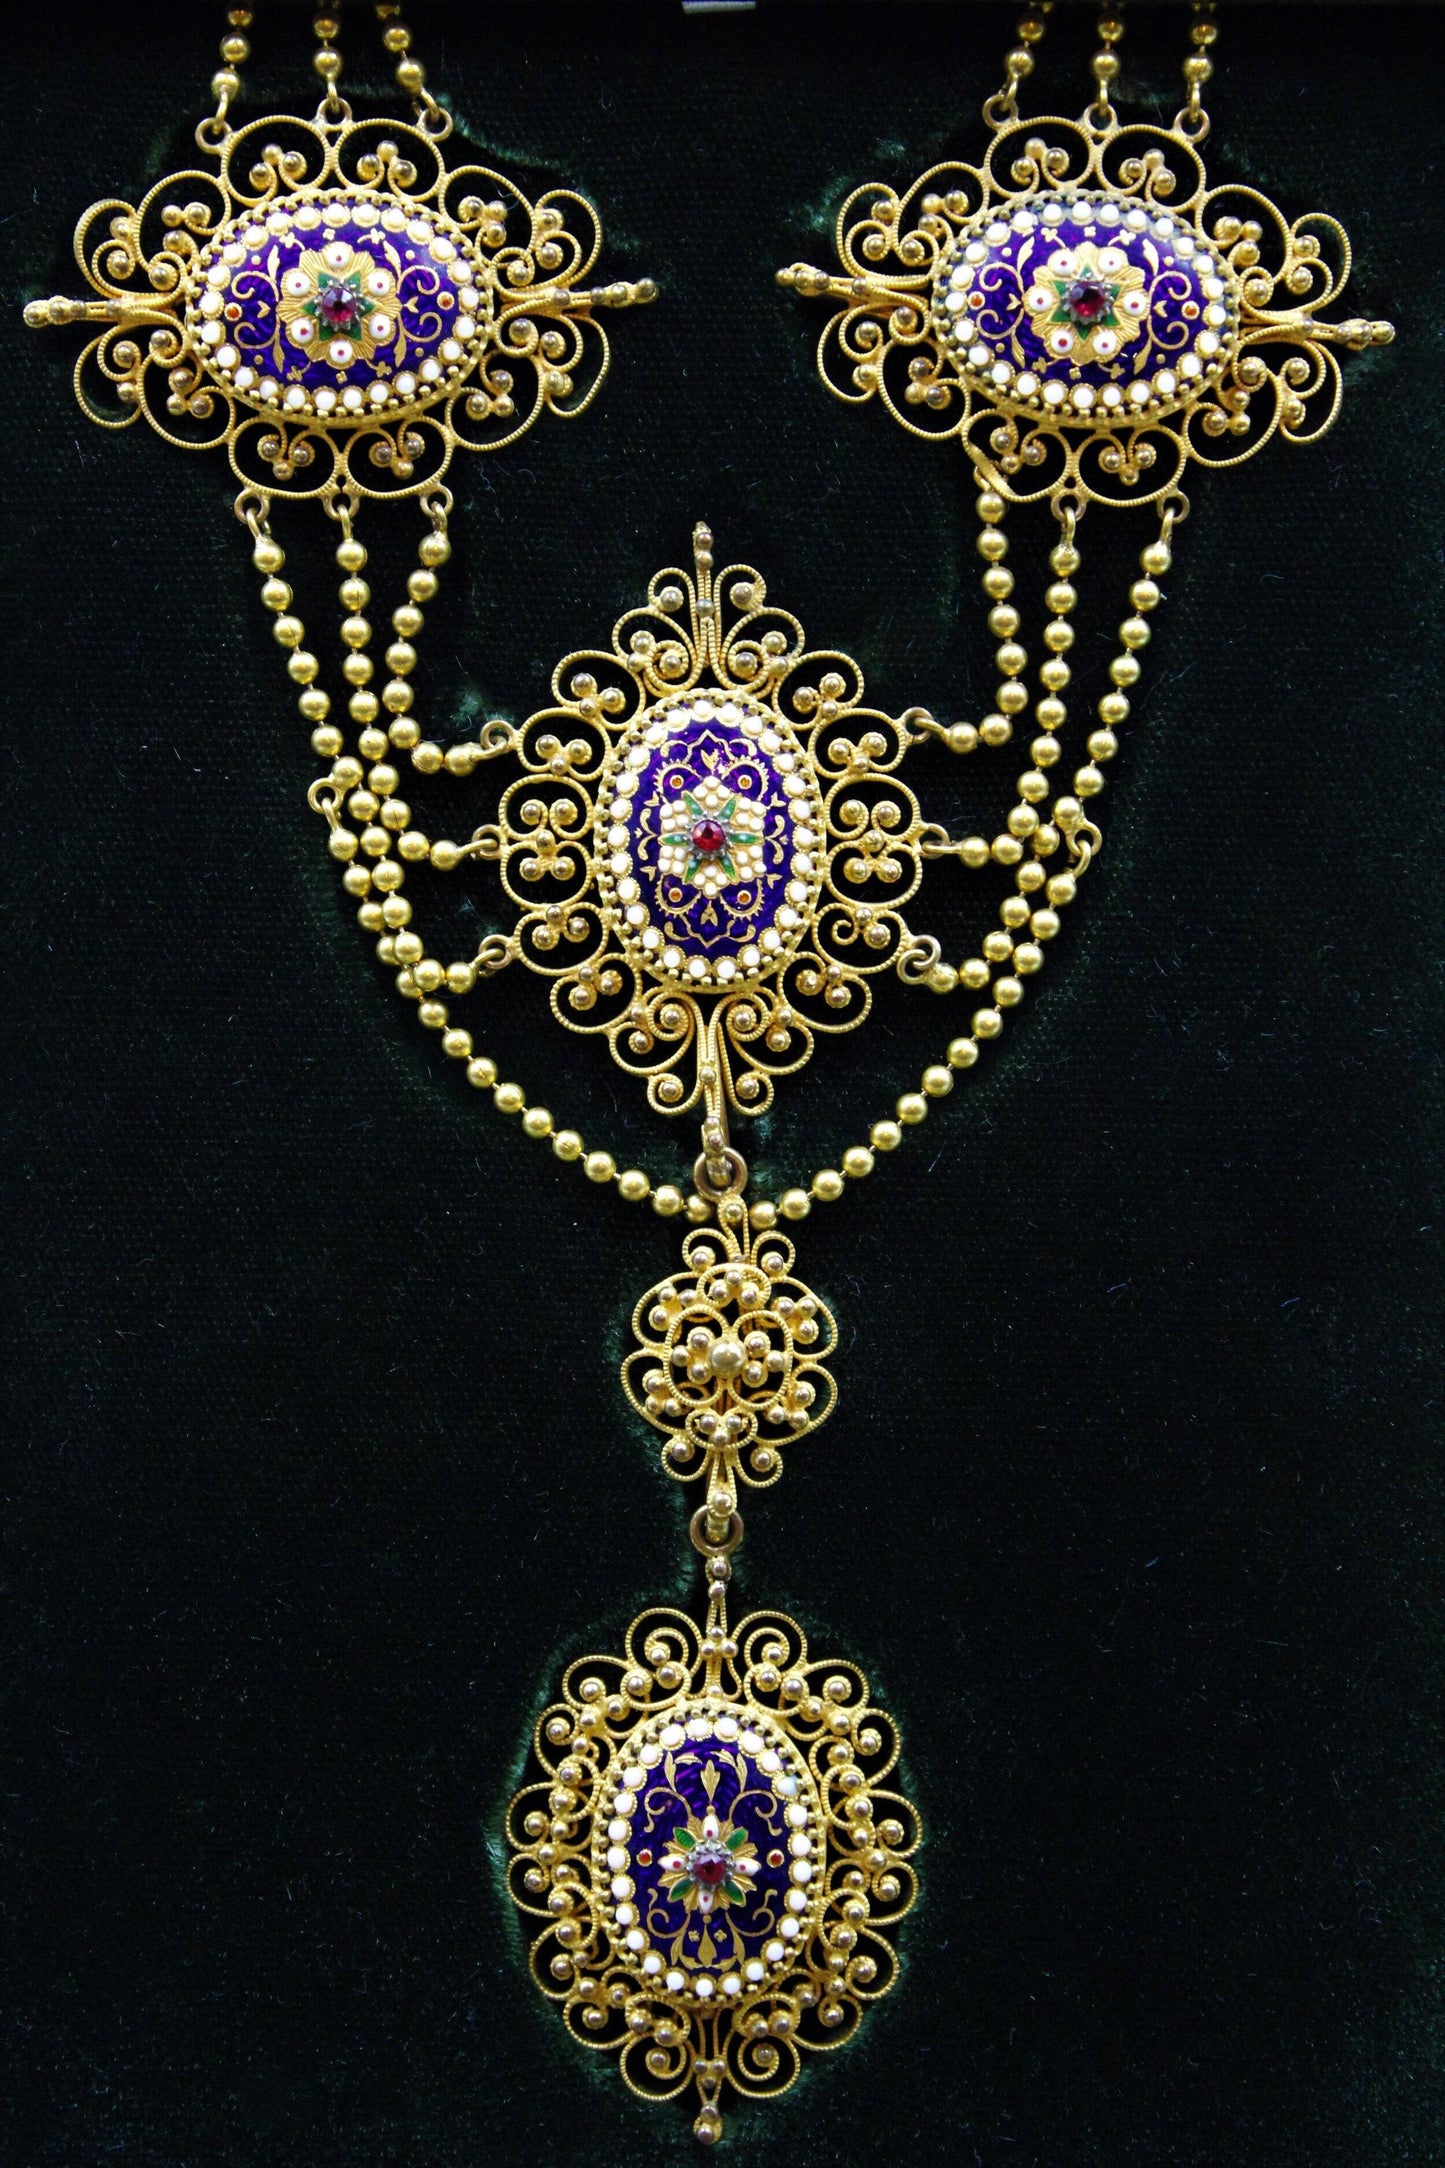 An exquisite Gilt metal Necklace with finely worked Bressan Enamel panels surrounded by Gilded filigree work in the Cannetille style with a detachable Pendant, French, Circa 1870 - Robin Haydock Antiques